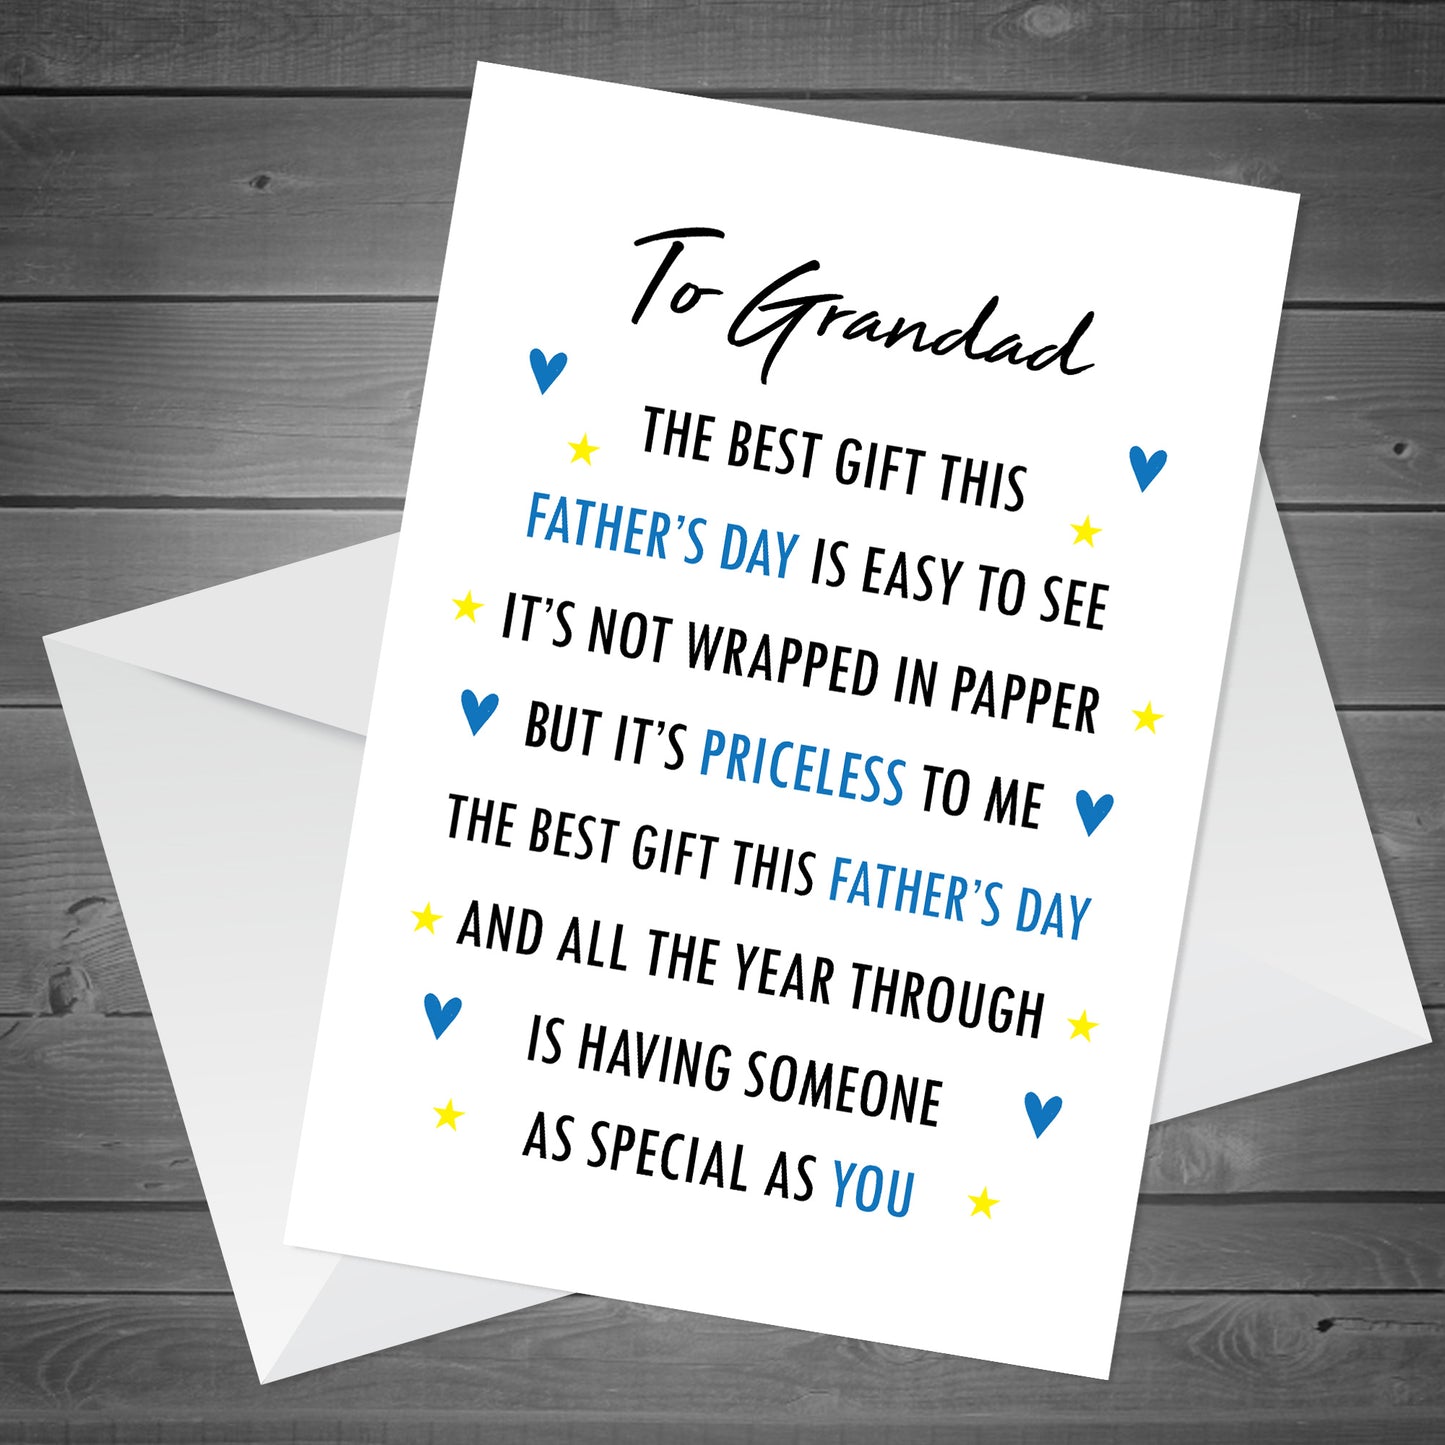 Fathers Day Card For Grandad Thank You Card For Grandad